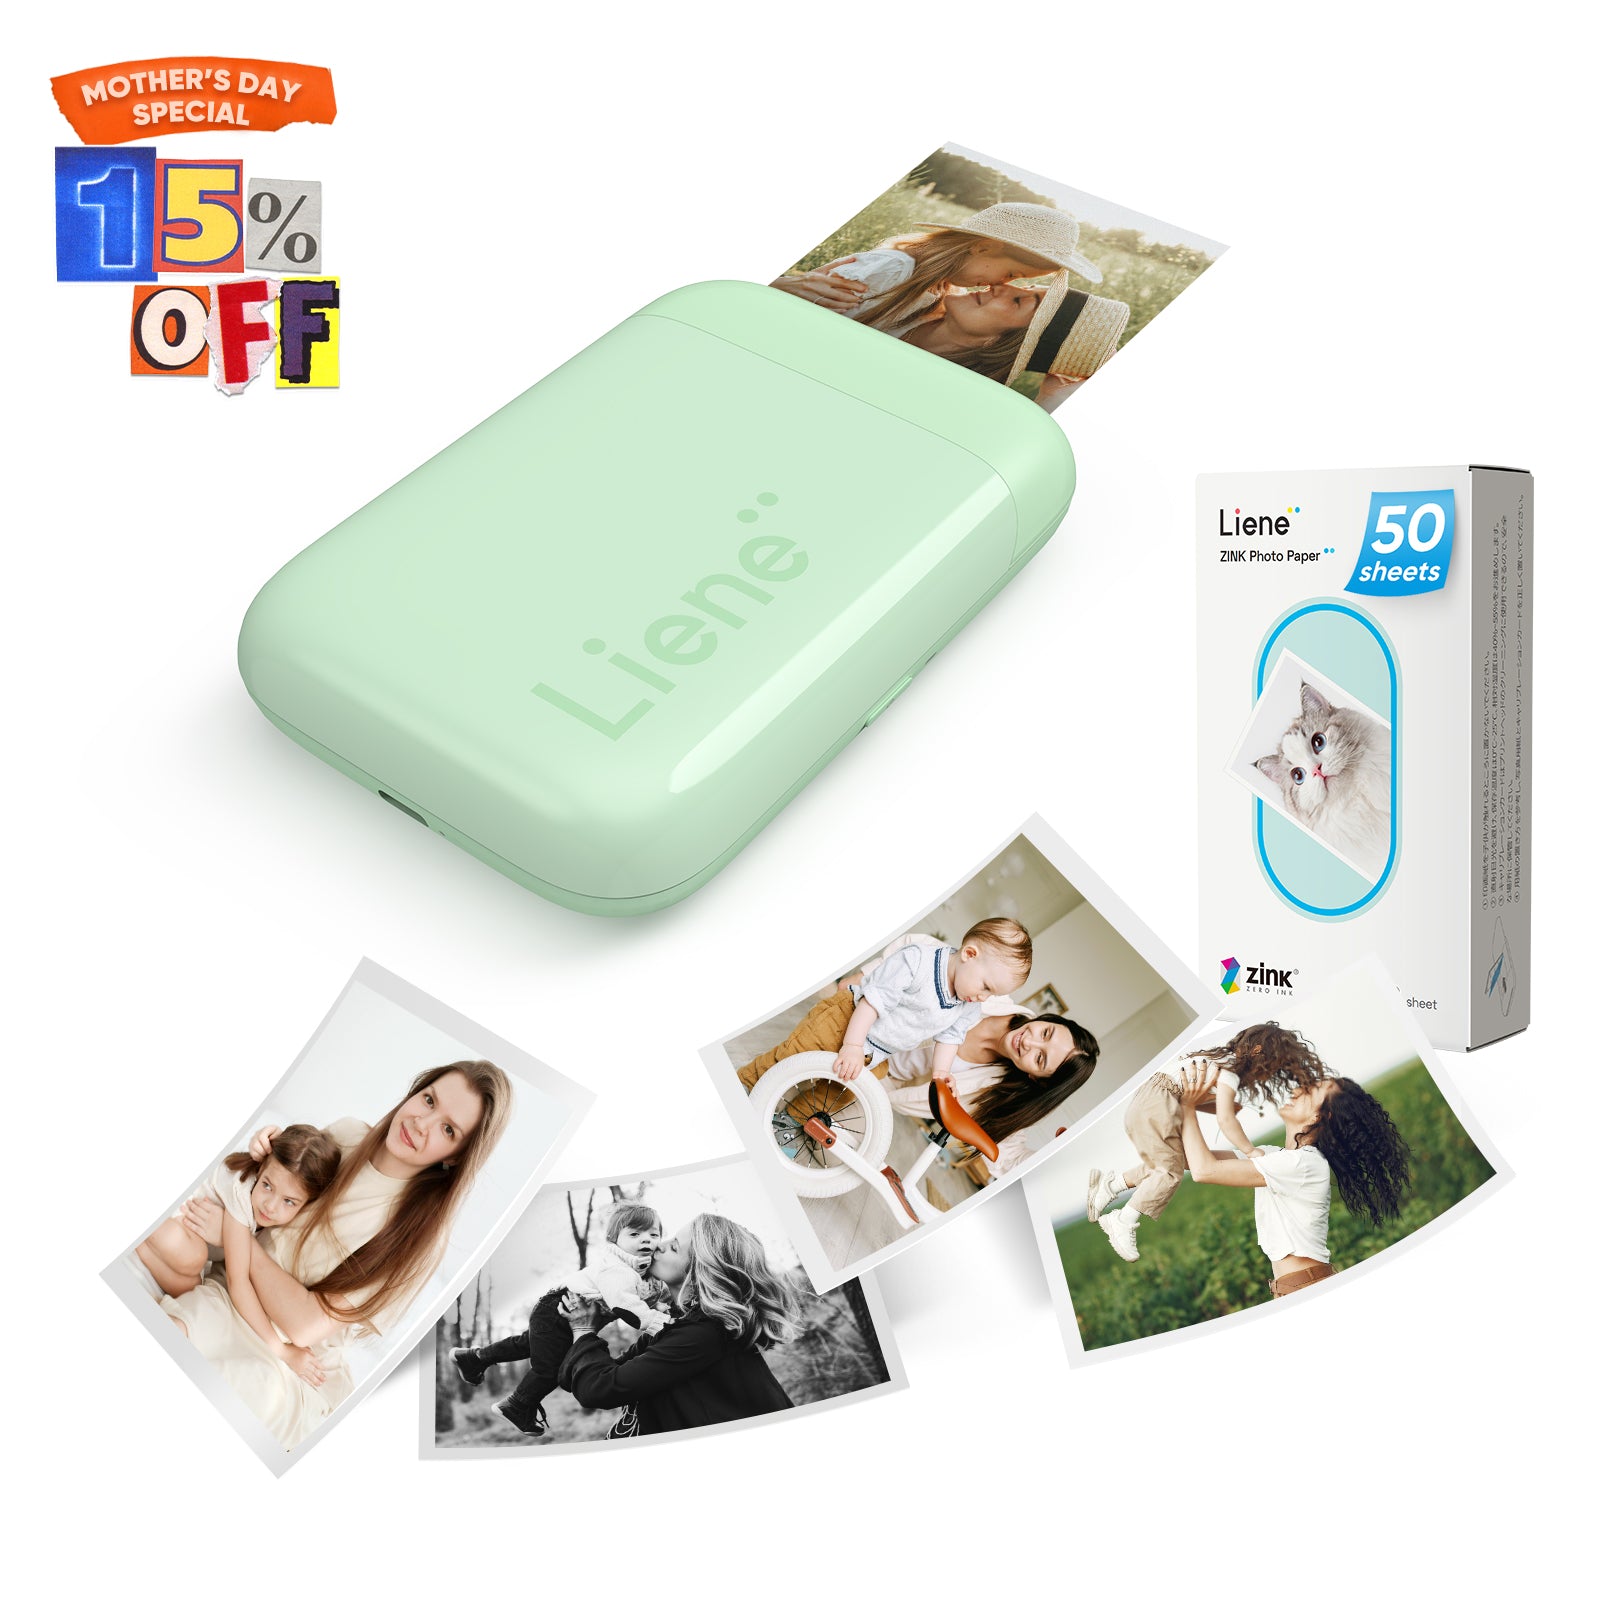 Liene Pearl K100 2x3" Portable Photo Printer - Green (50 Zink Photo Papers)